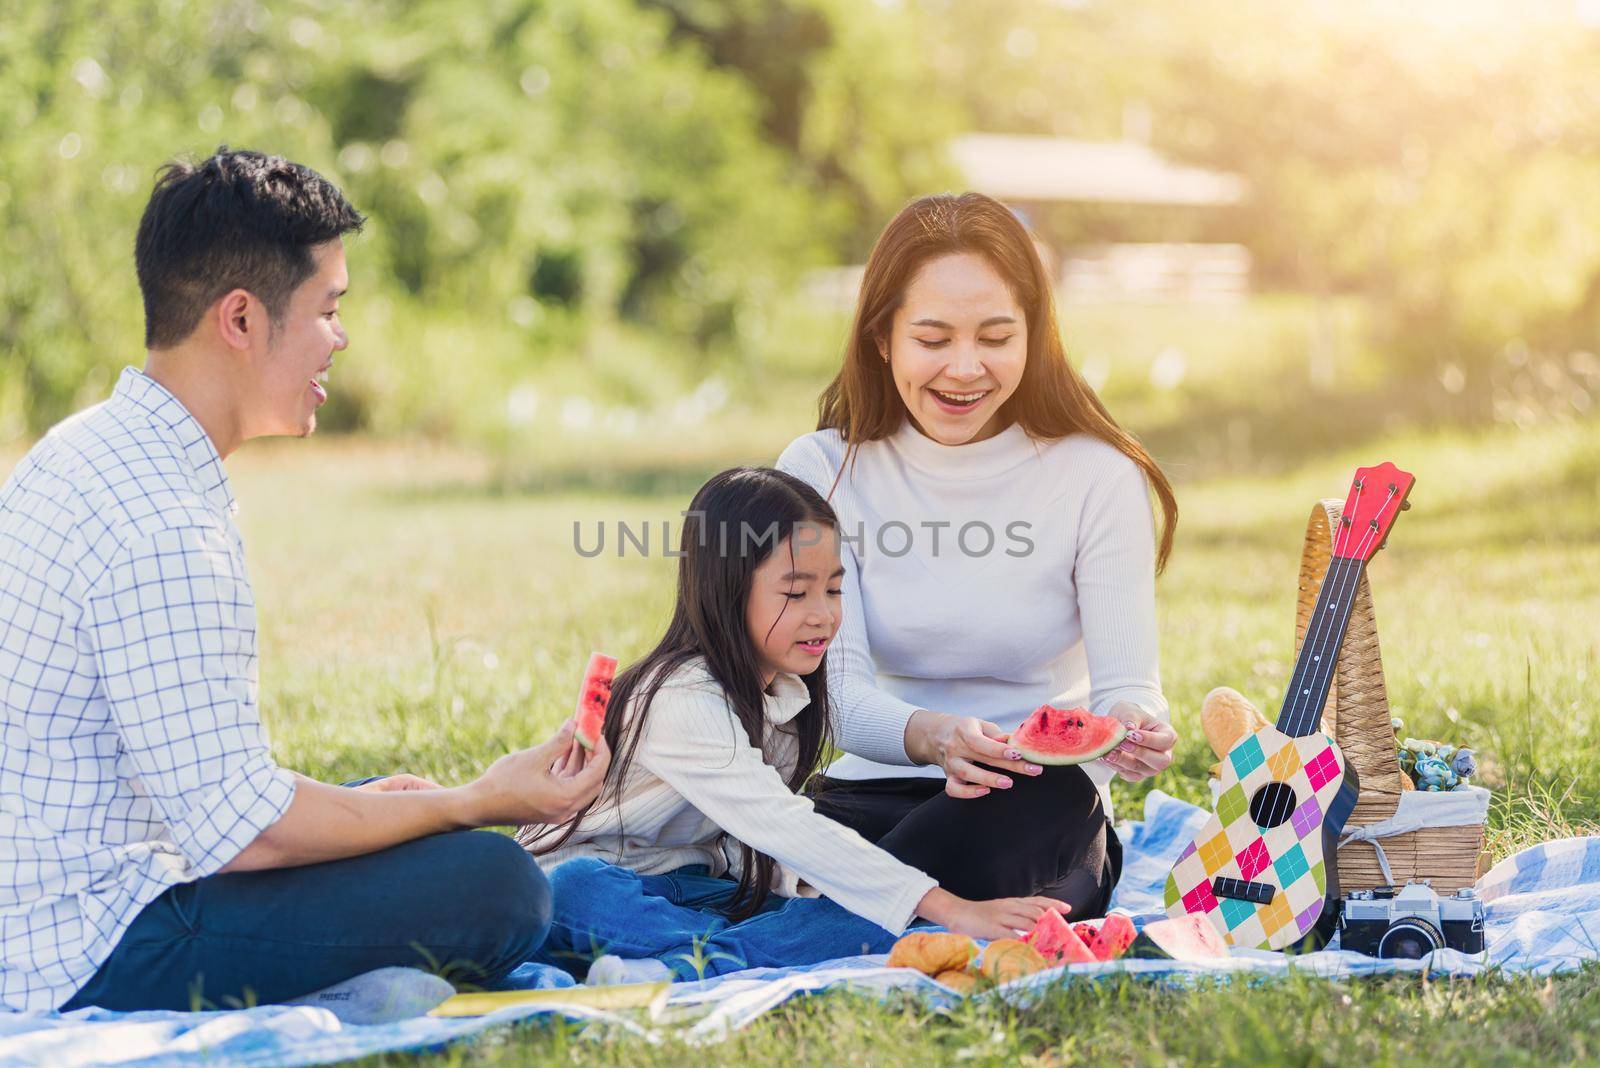 Happy family having enjoying outdoor sitting on picnic blanket eating watermelon in park sunny time by Sorapop